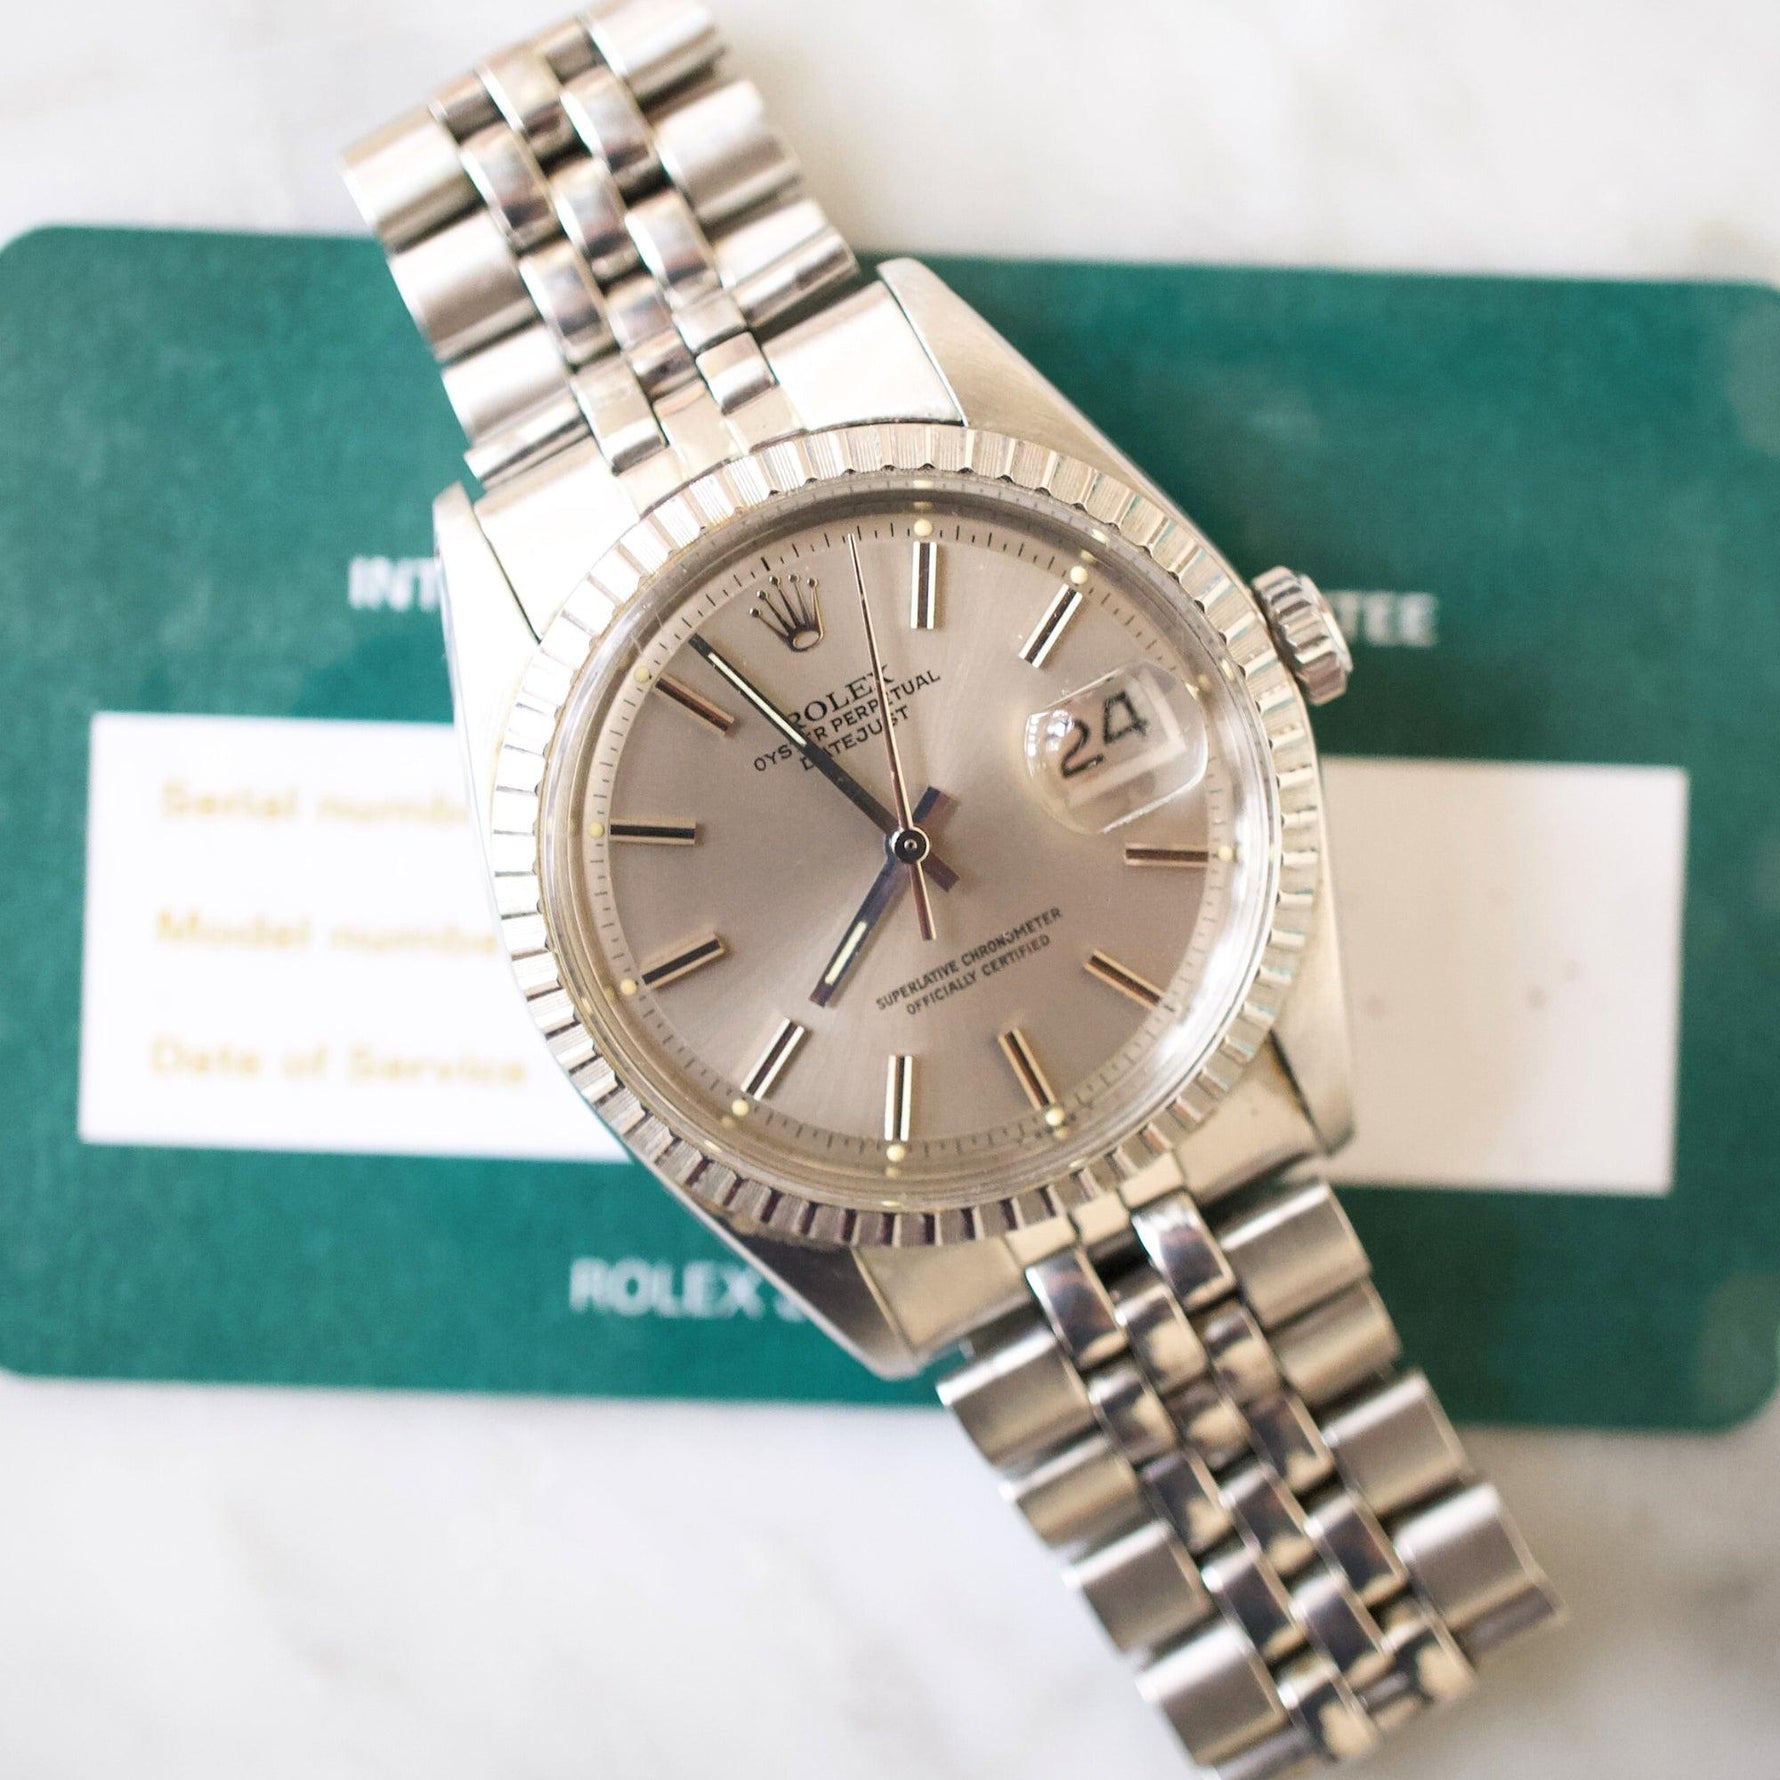 SOLD OUT: 1978 Rolex Datejust 1603 36MM Ghost/Grey Dial FACTORY SERVICE Box CARD Engine Turned - WearingTime Luxury Watches